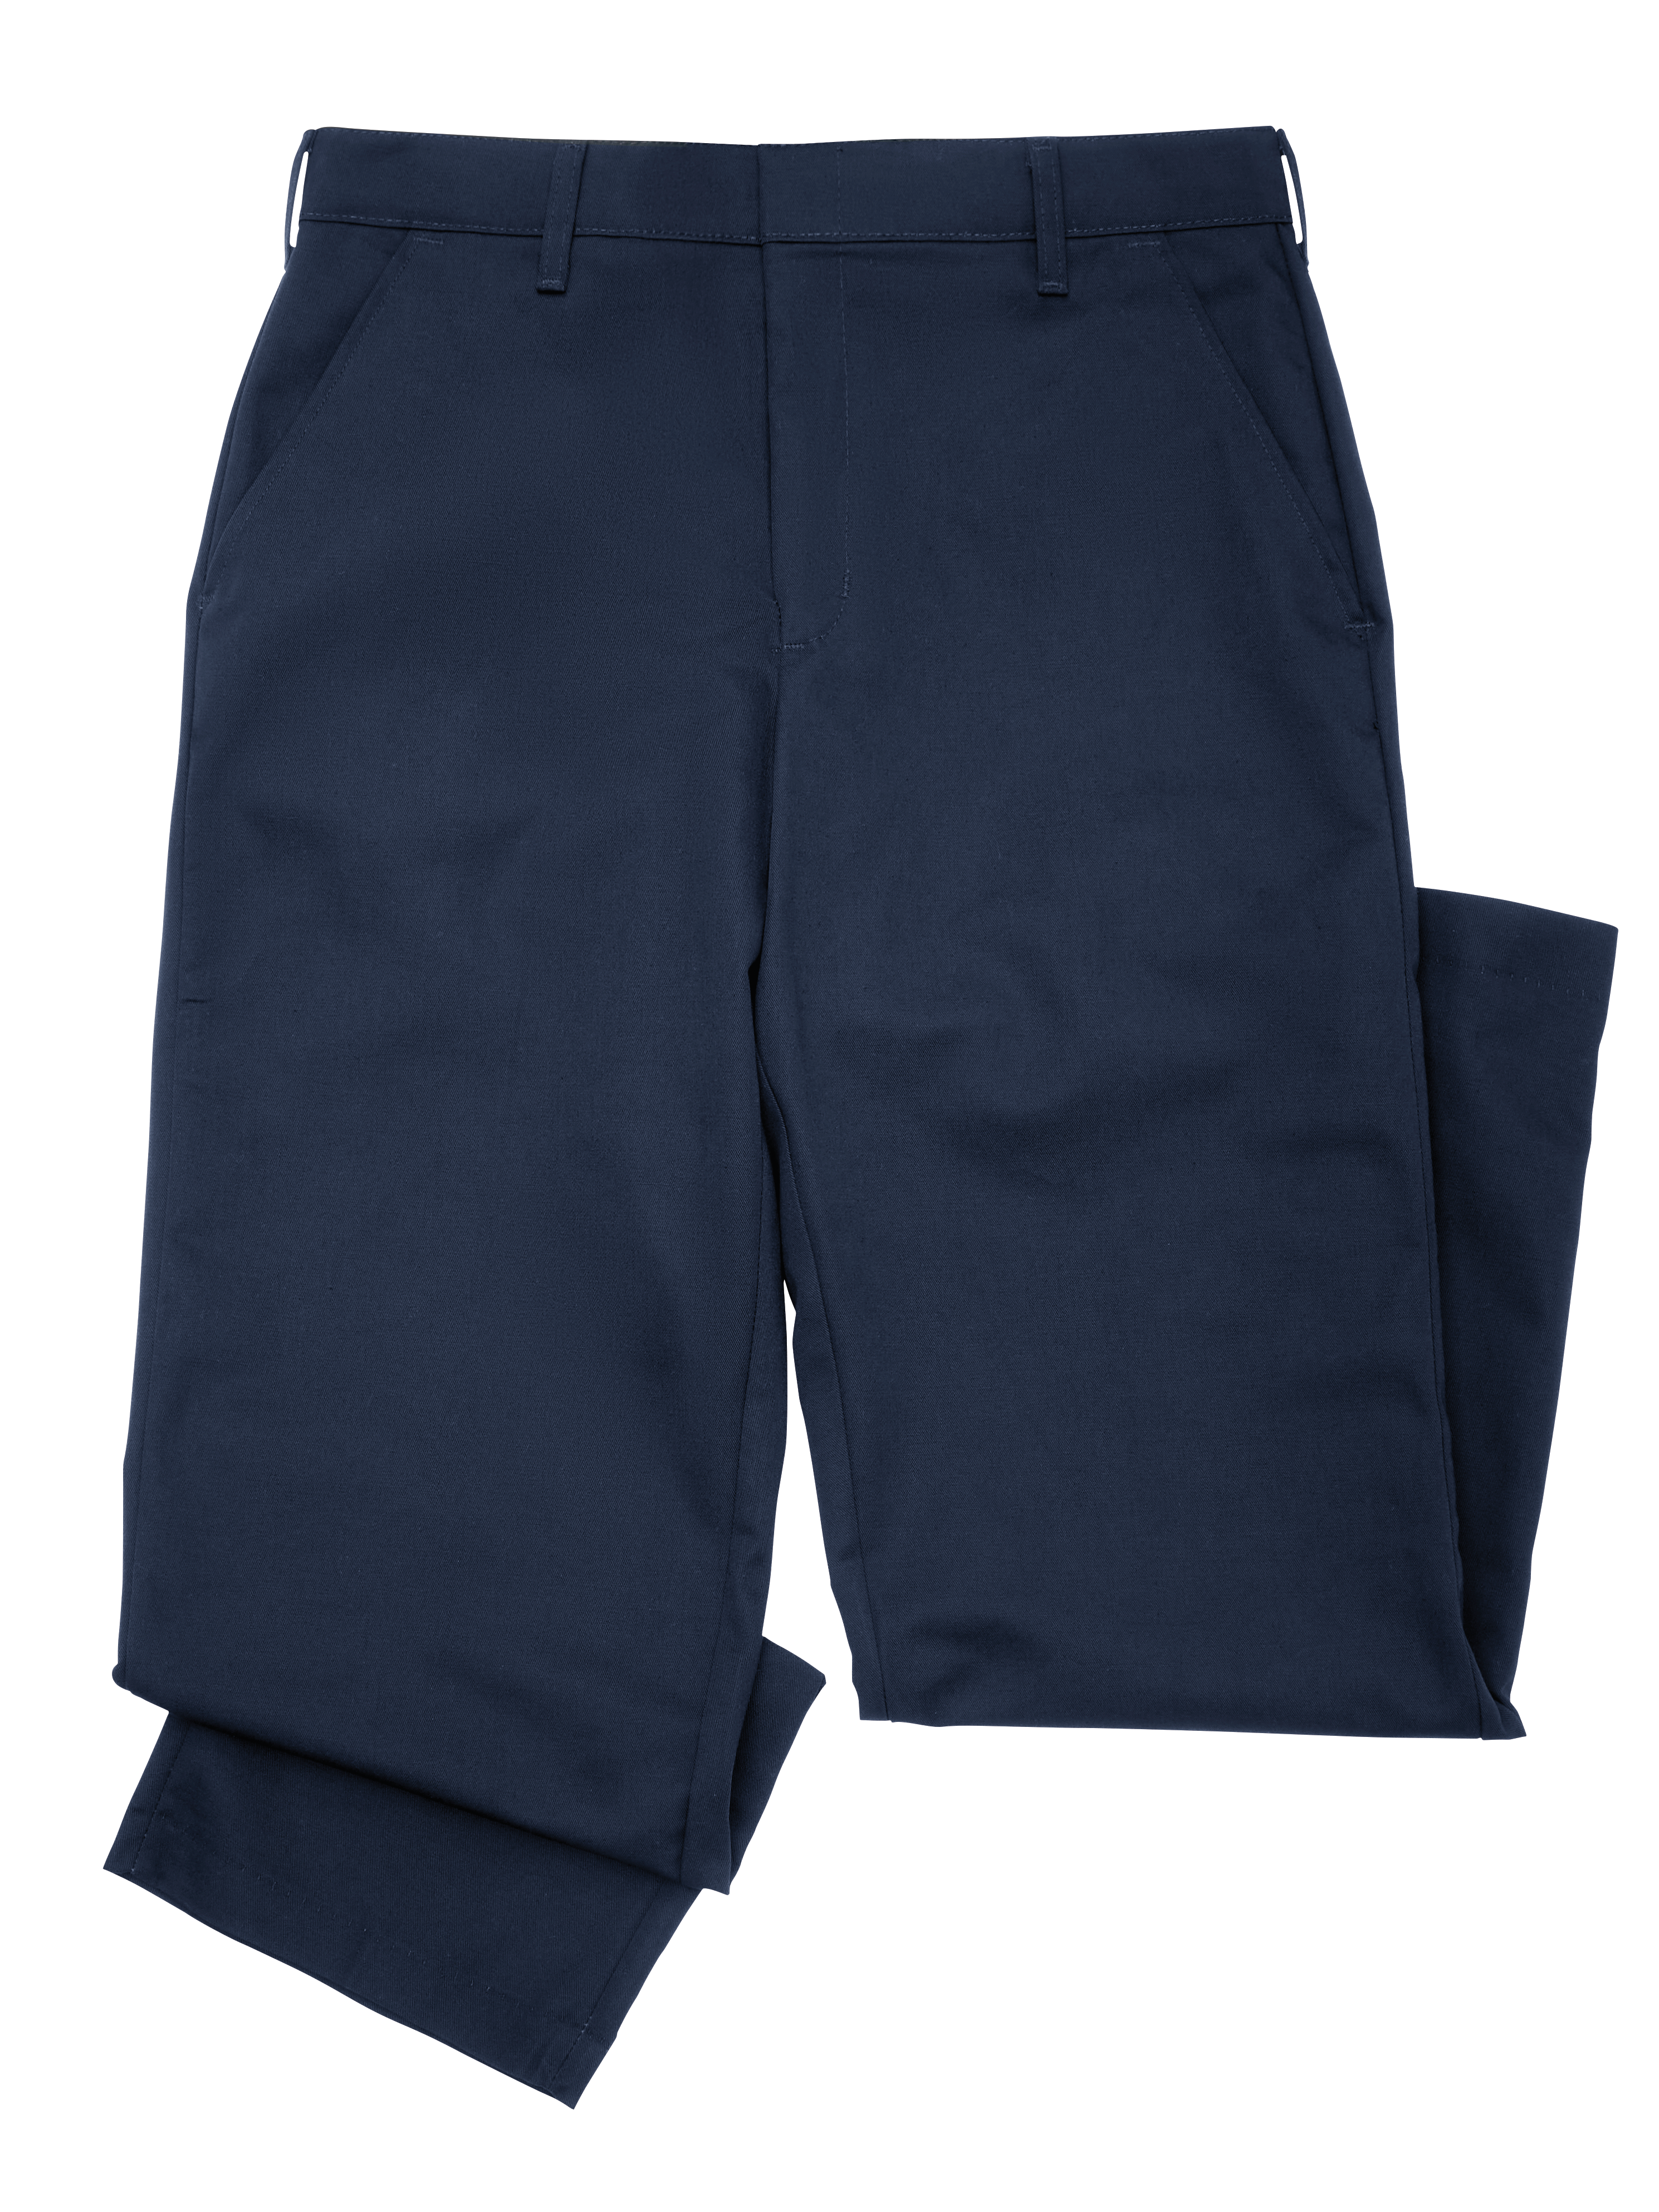 Men's Industrial Pants Cellphone Pocket | Prudential Overall Supply